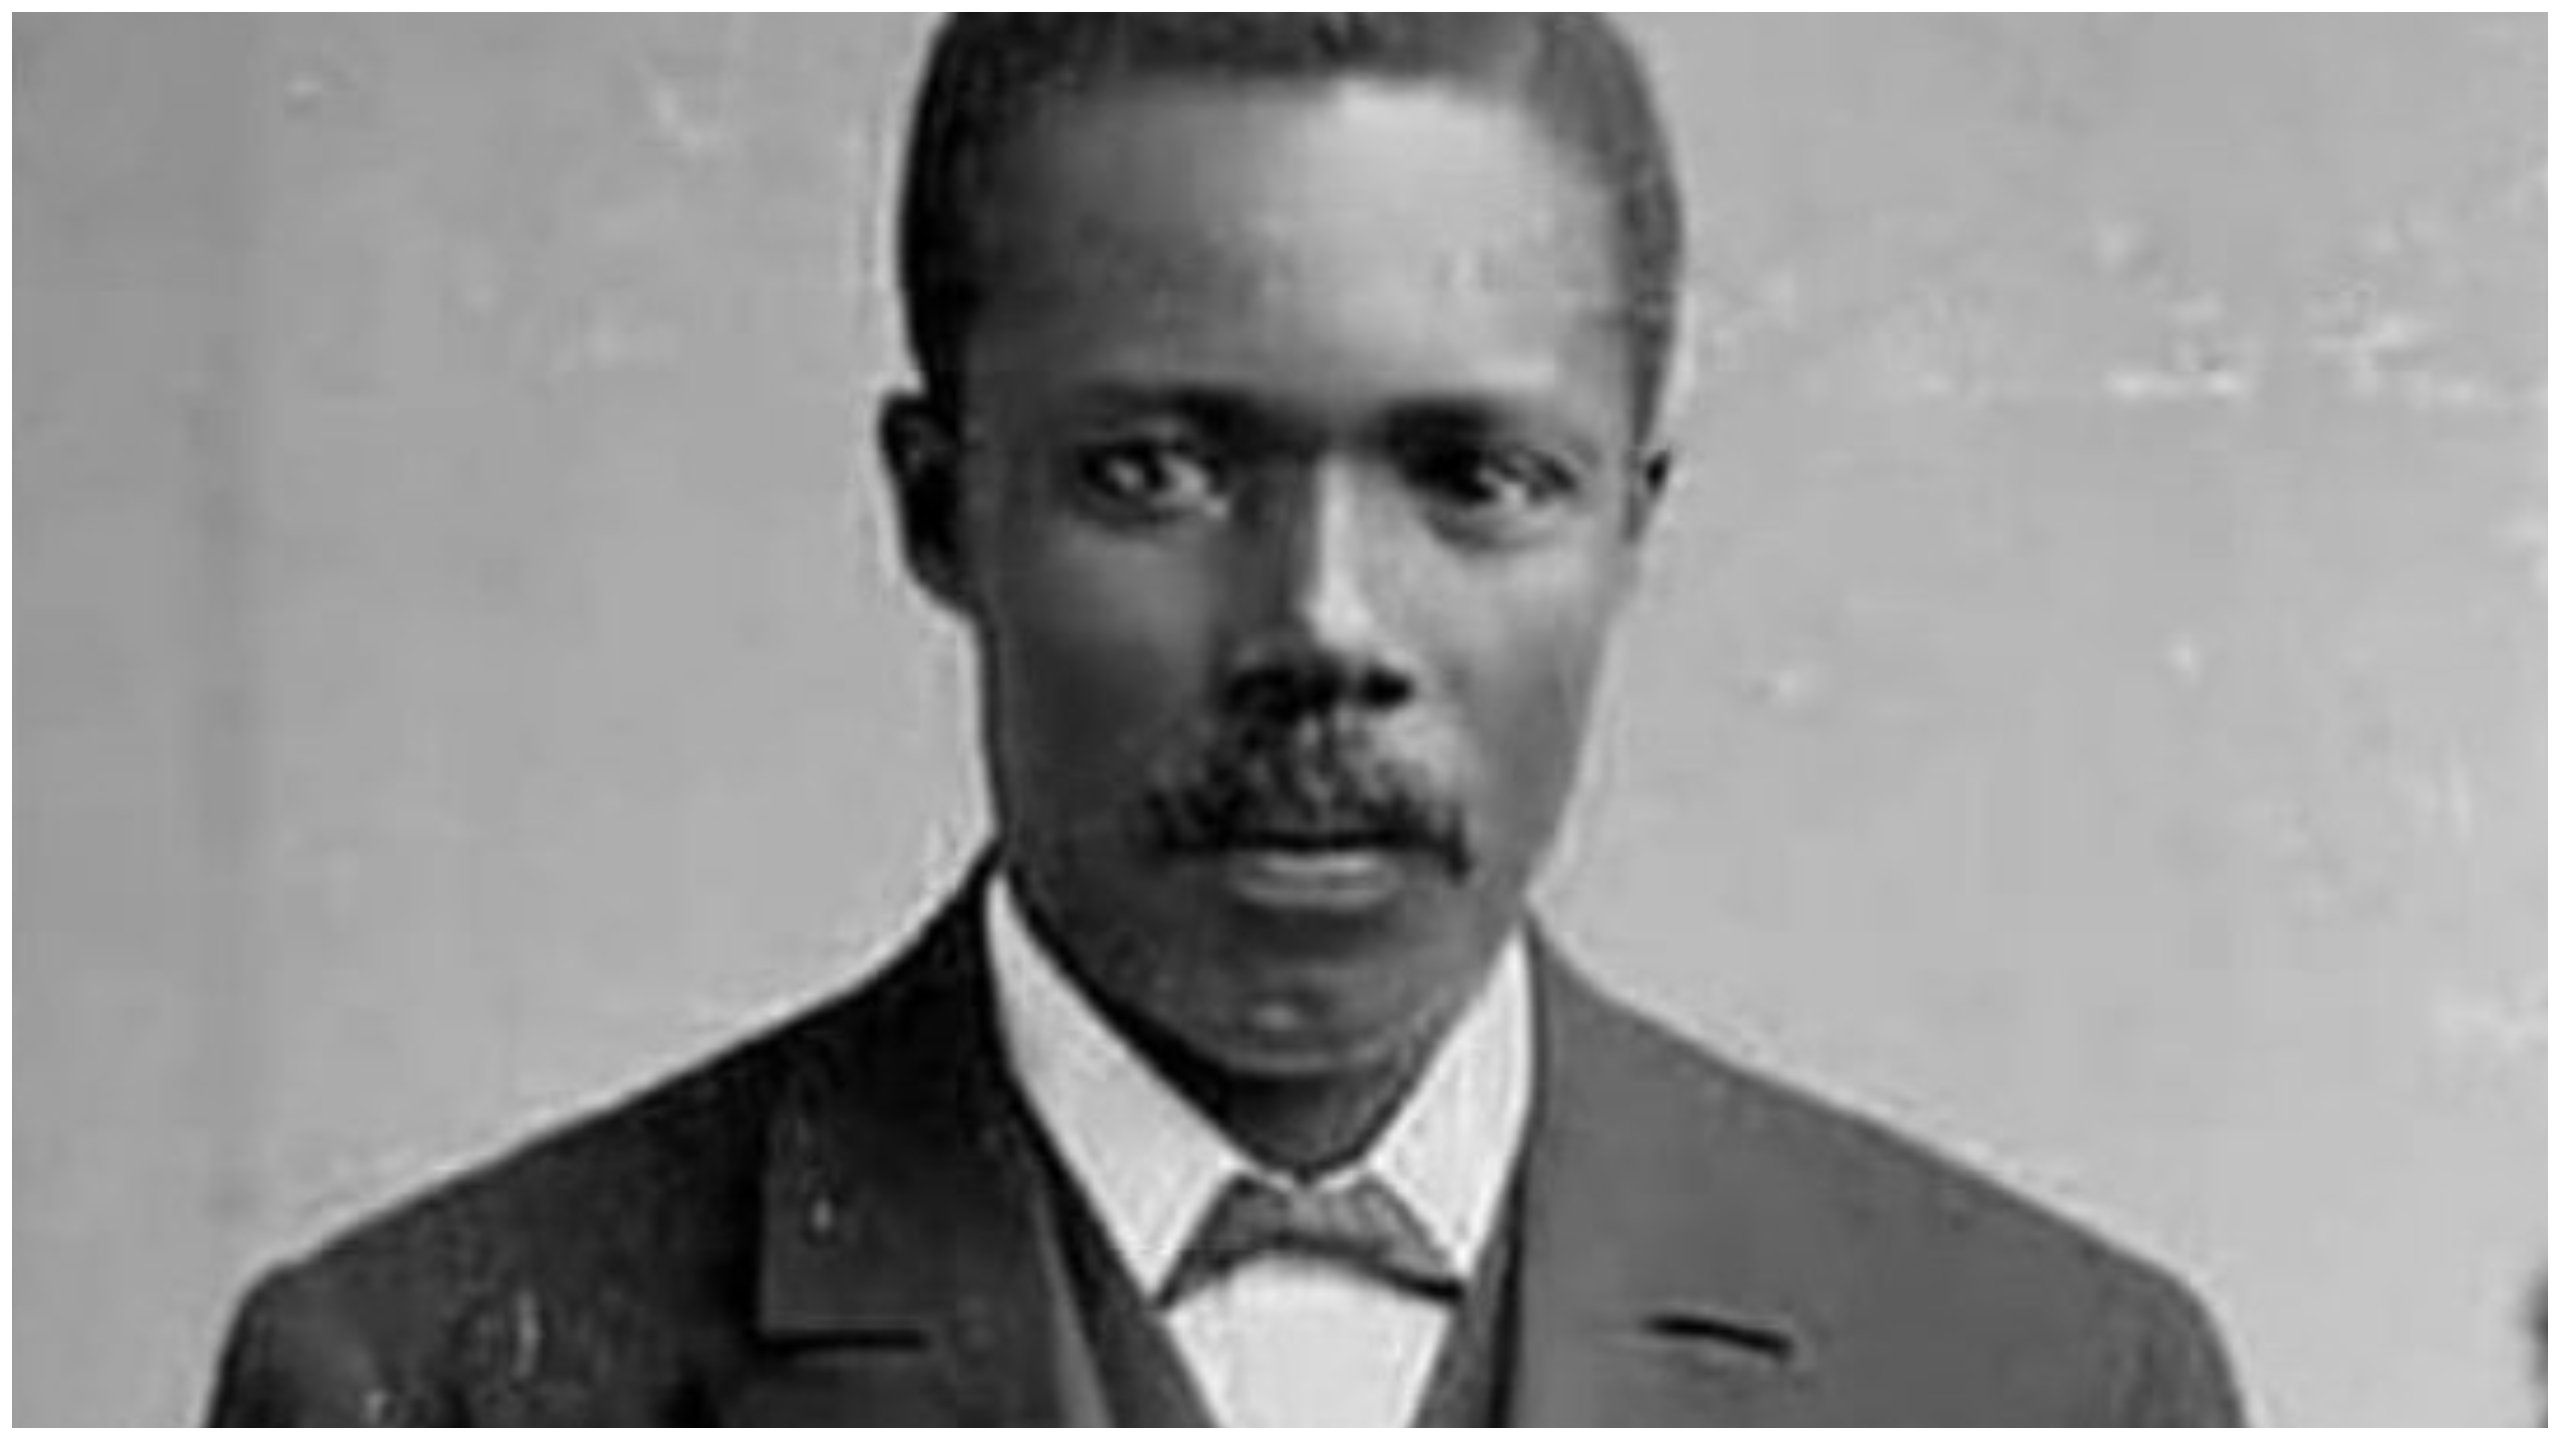 Meet George Crum The 19th-Century Black Man Who Made The First Potato Chips That Is Widely Consumed Today